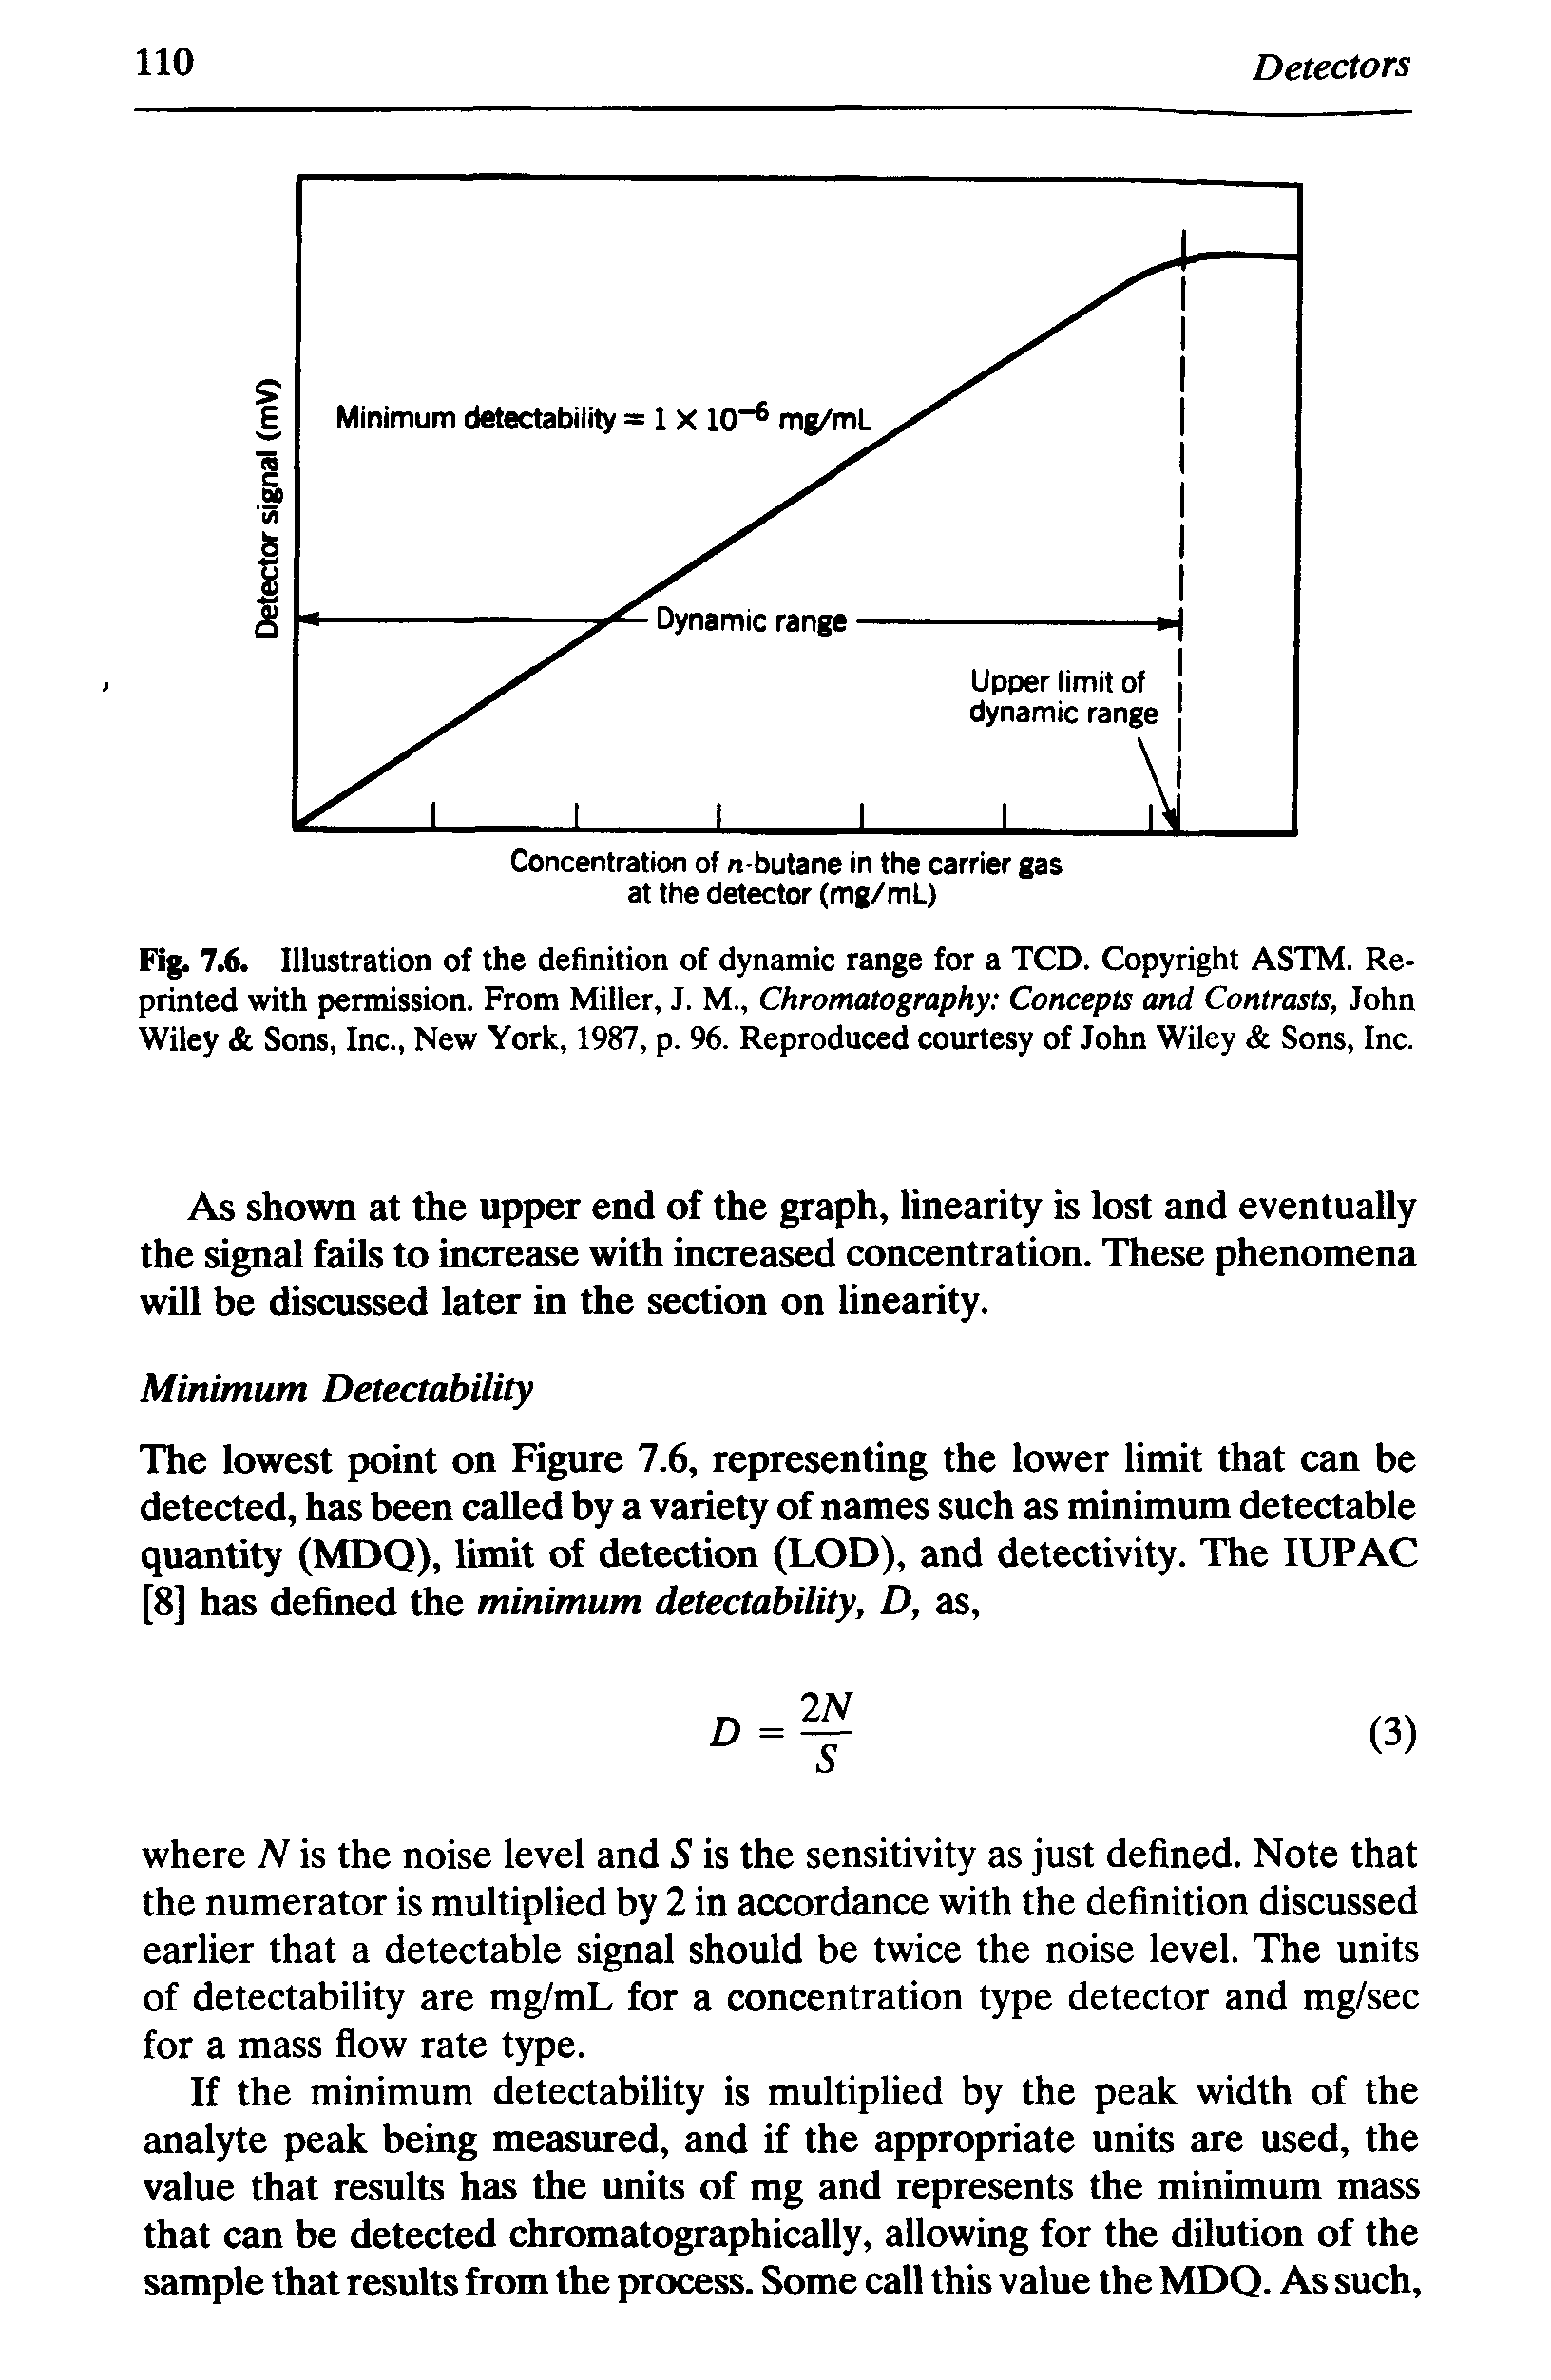 Fig. 7.6. Illustration of the definition of dynamic range for a TCD. Copyright ASTM. Reprinted with permission. From Miller, J. M., Chromatography Concepts and Contrasts, John Wiley Sons, Inc., New York, 1987, p. 96. Reproduced courtesy of John Wiley Sons, Inc.